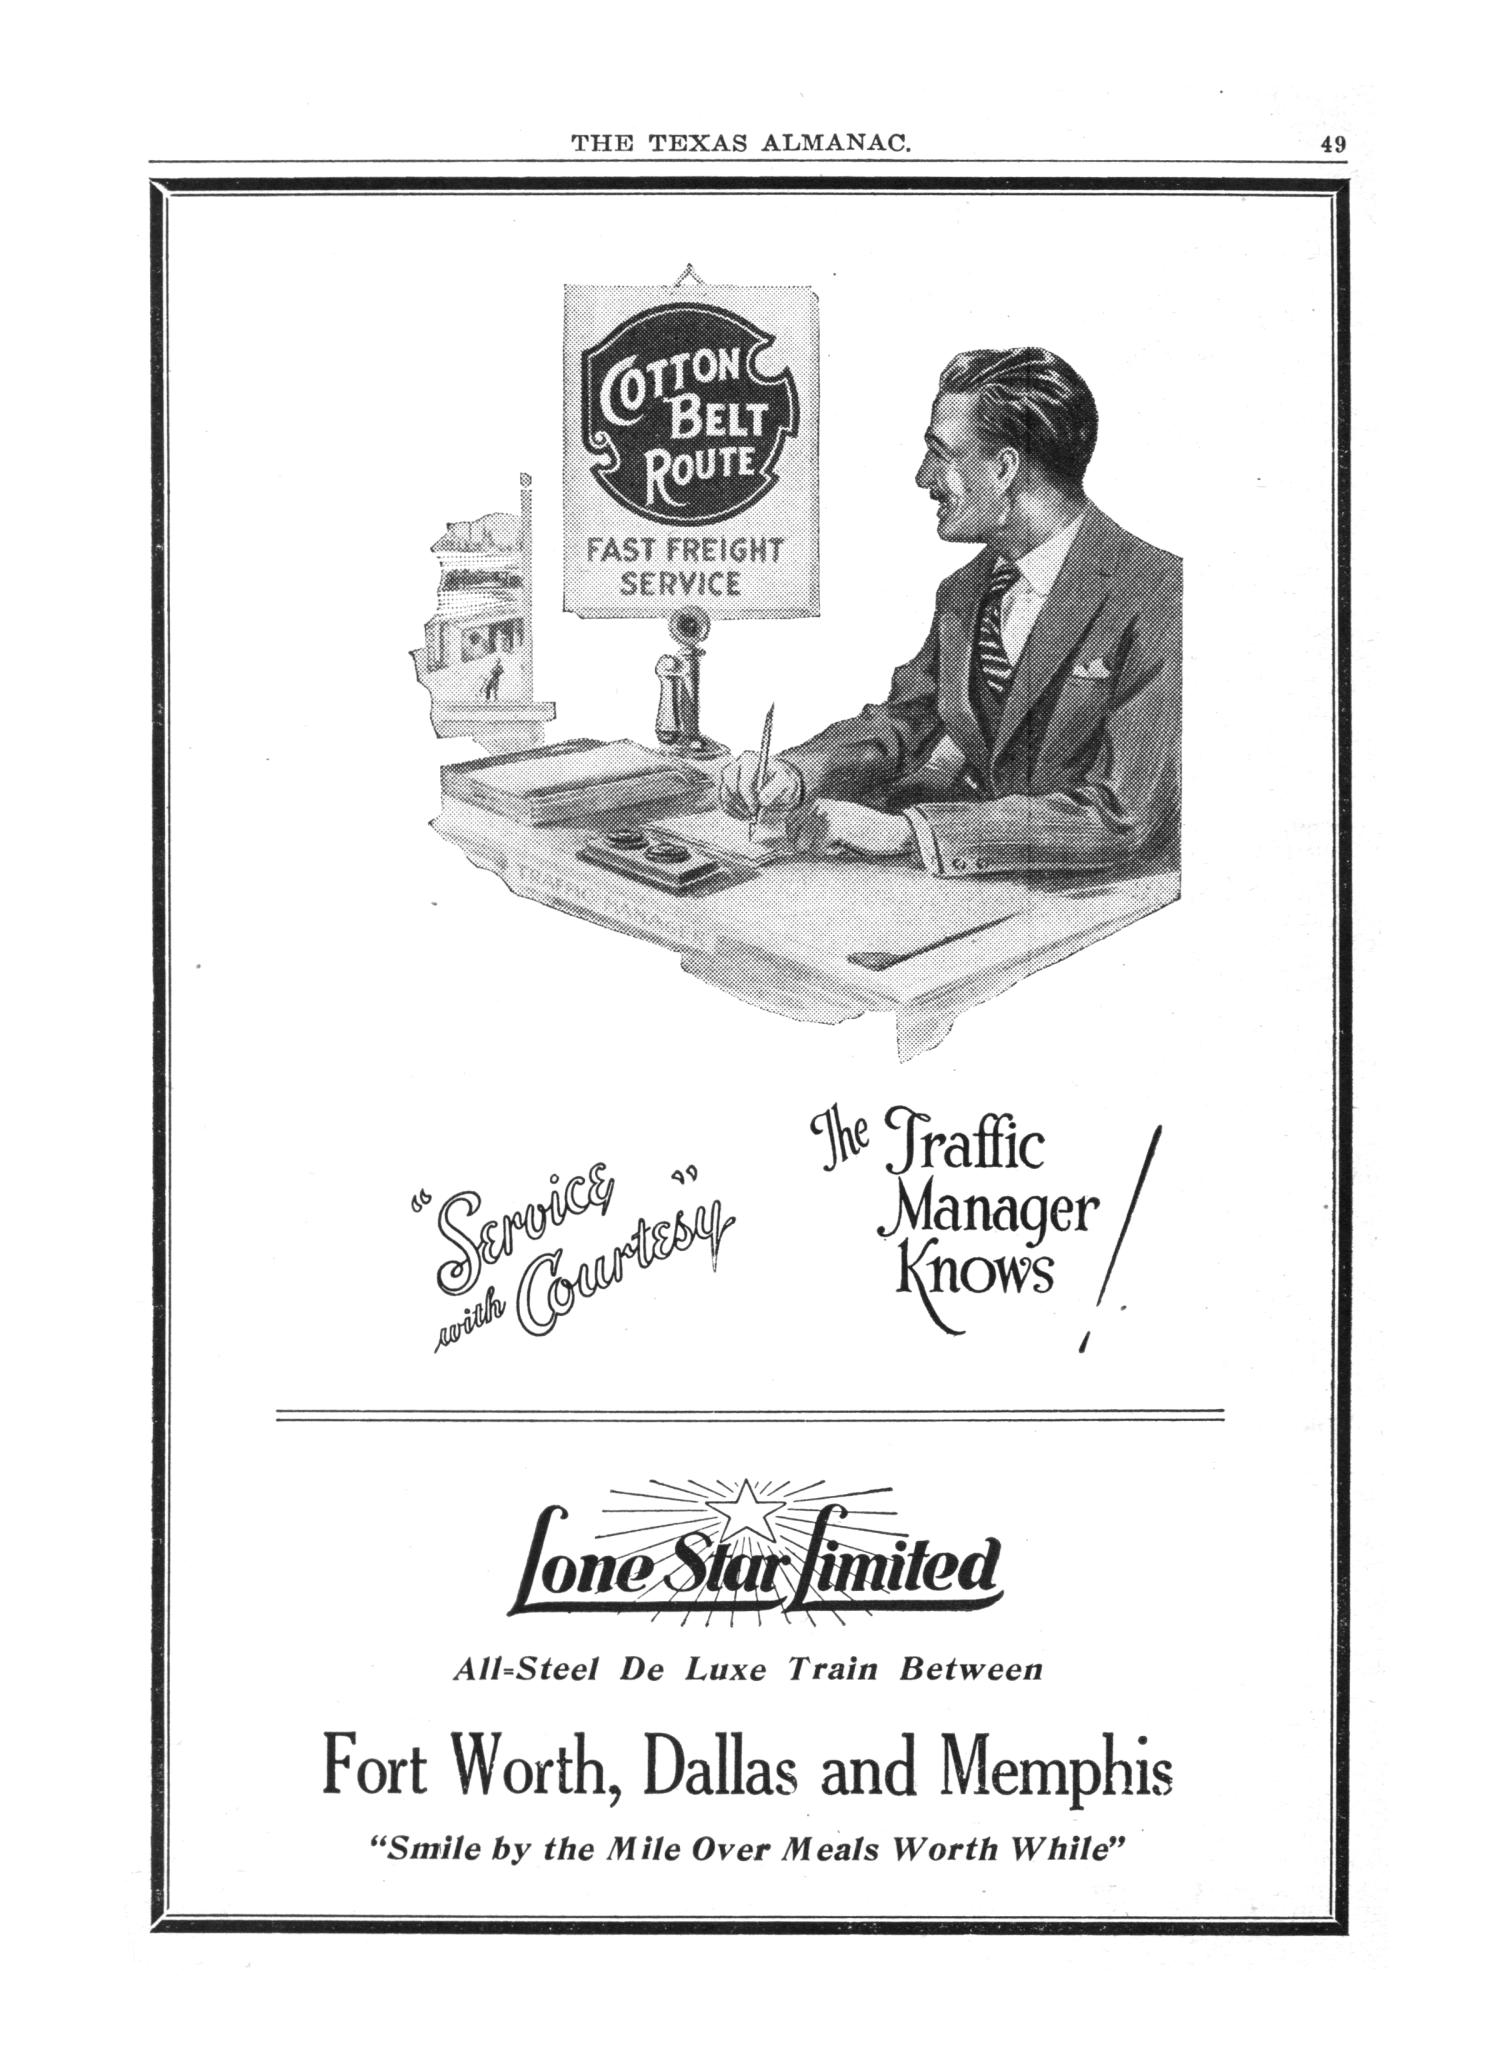 The 1928 Texas Almanac and State Industrial Guide
                                                
                                                    49
                                                